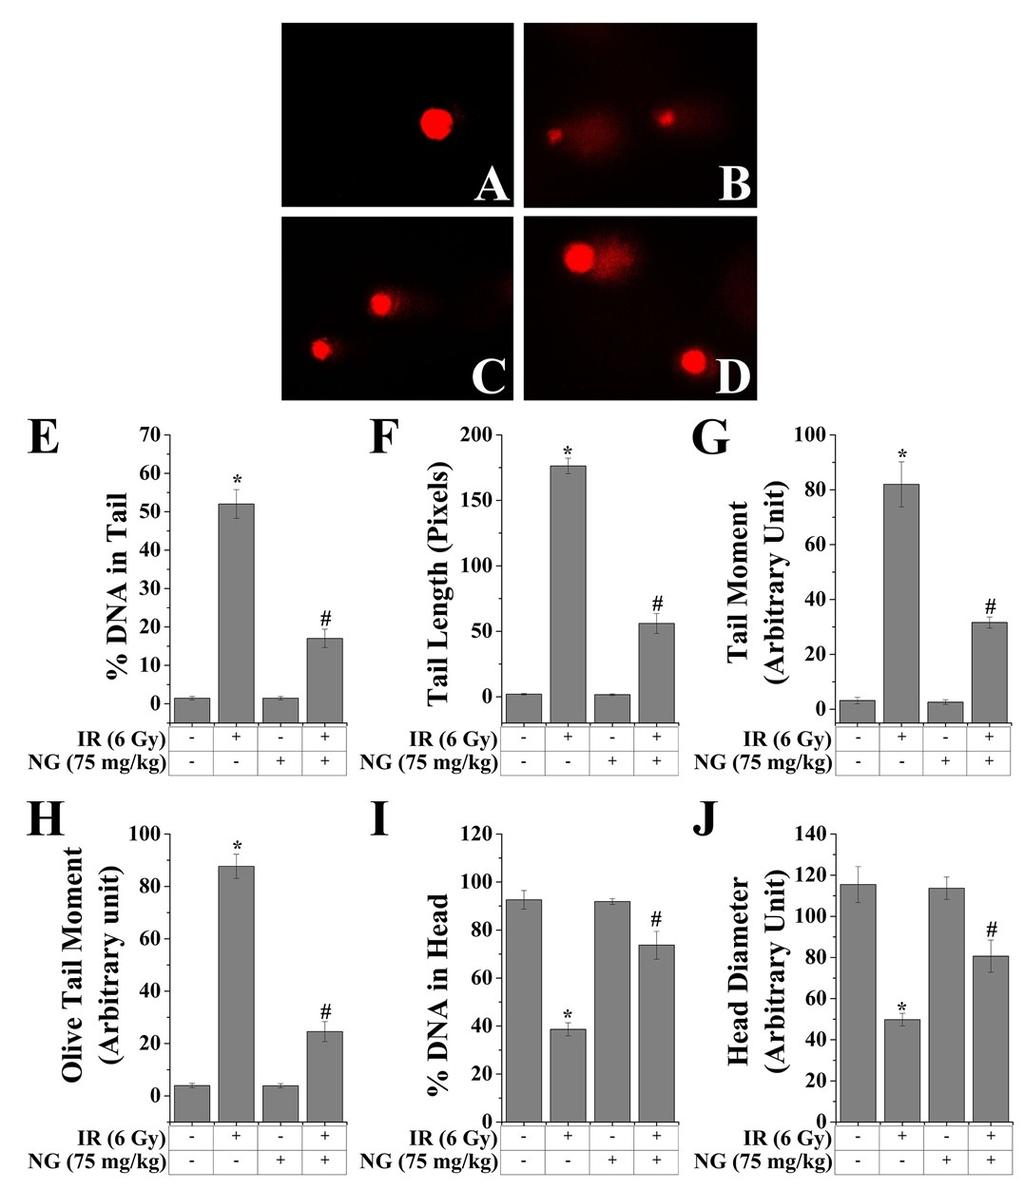 ESI2. NG protected IR-induced nuclear DNA damage: To investigate the effect of NG on IR-induced DNA damage, comet assay was performed (Fig. S2A, S2B, S2C and S2D).